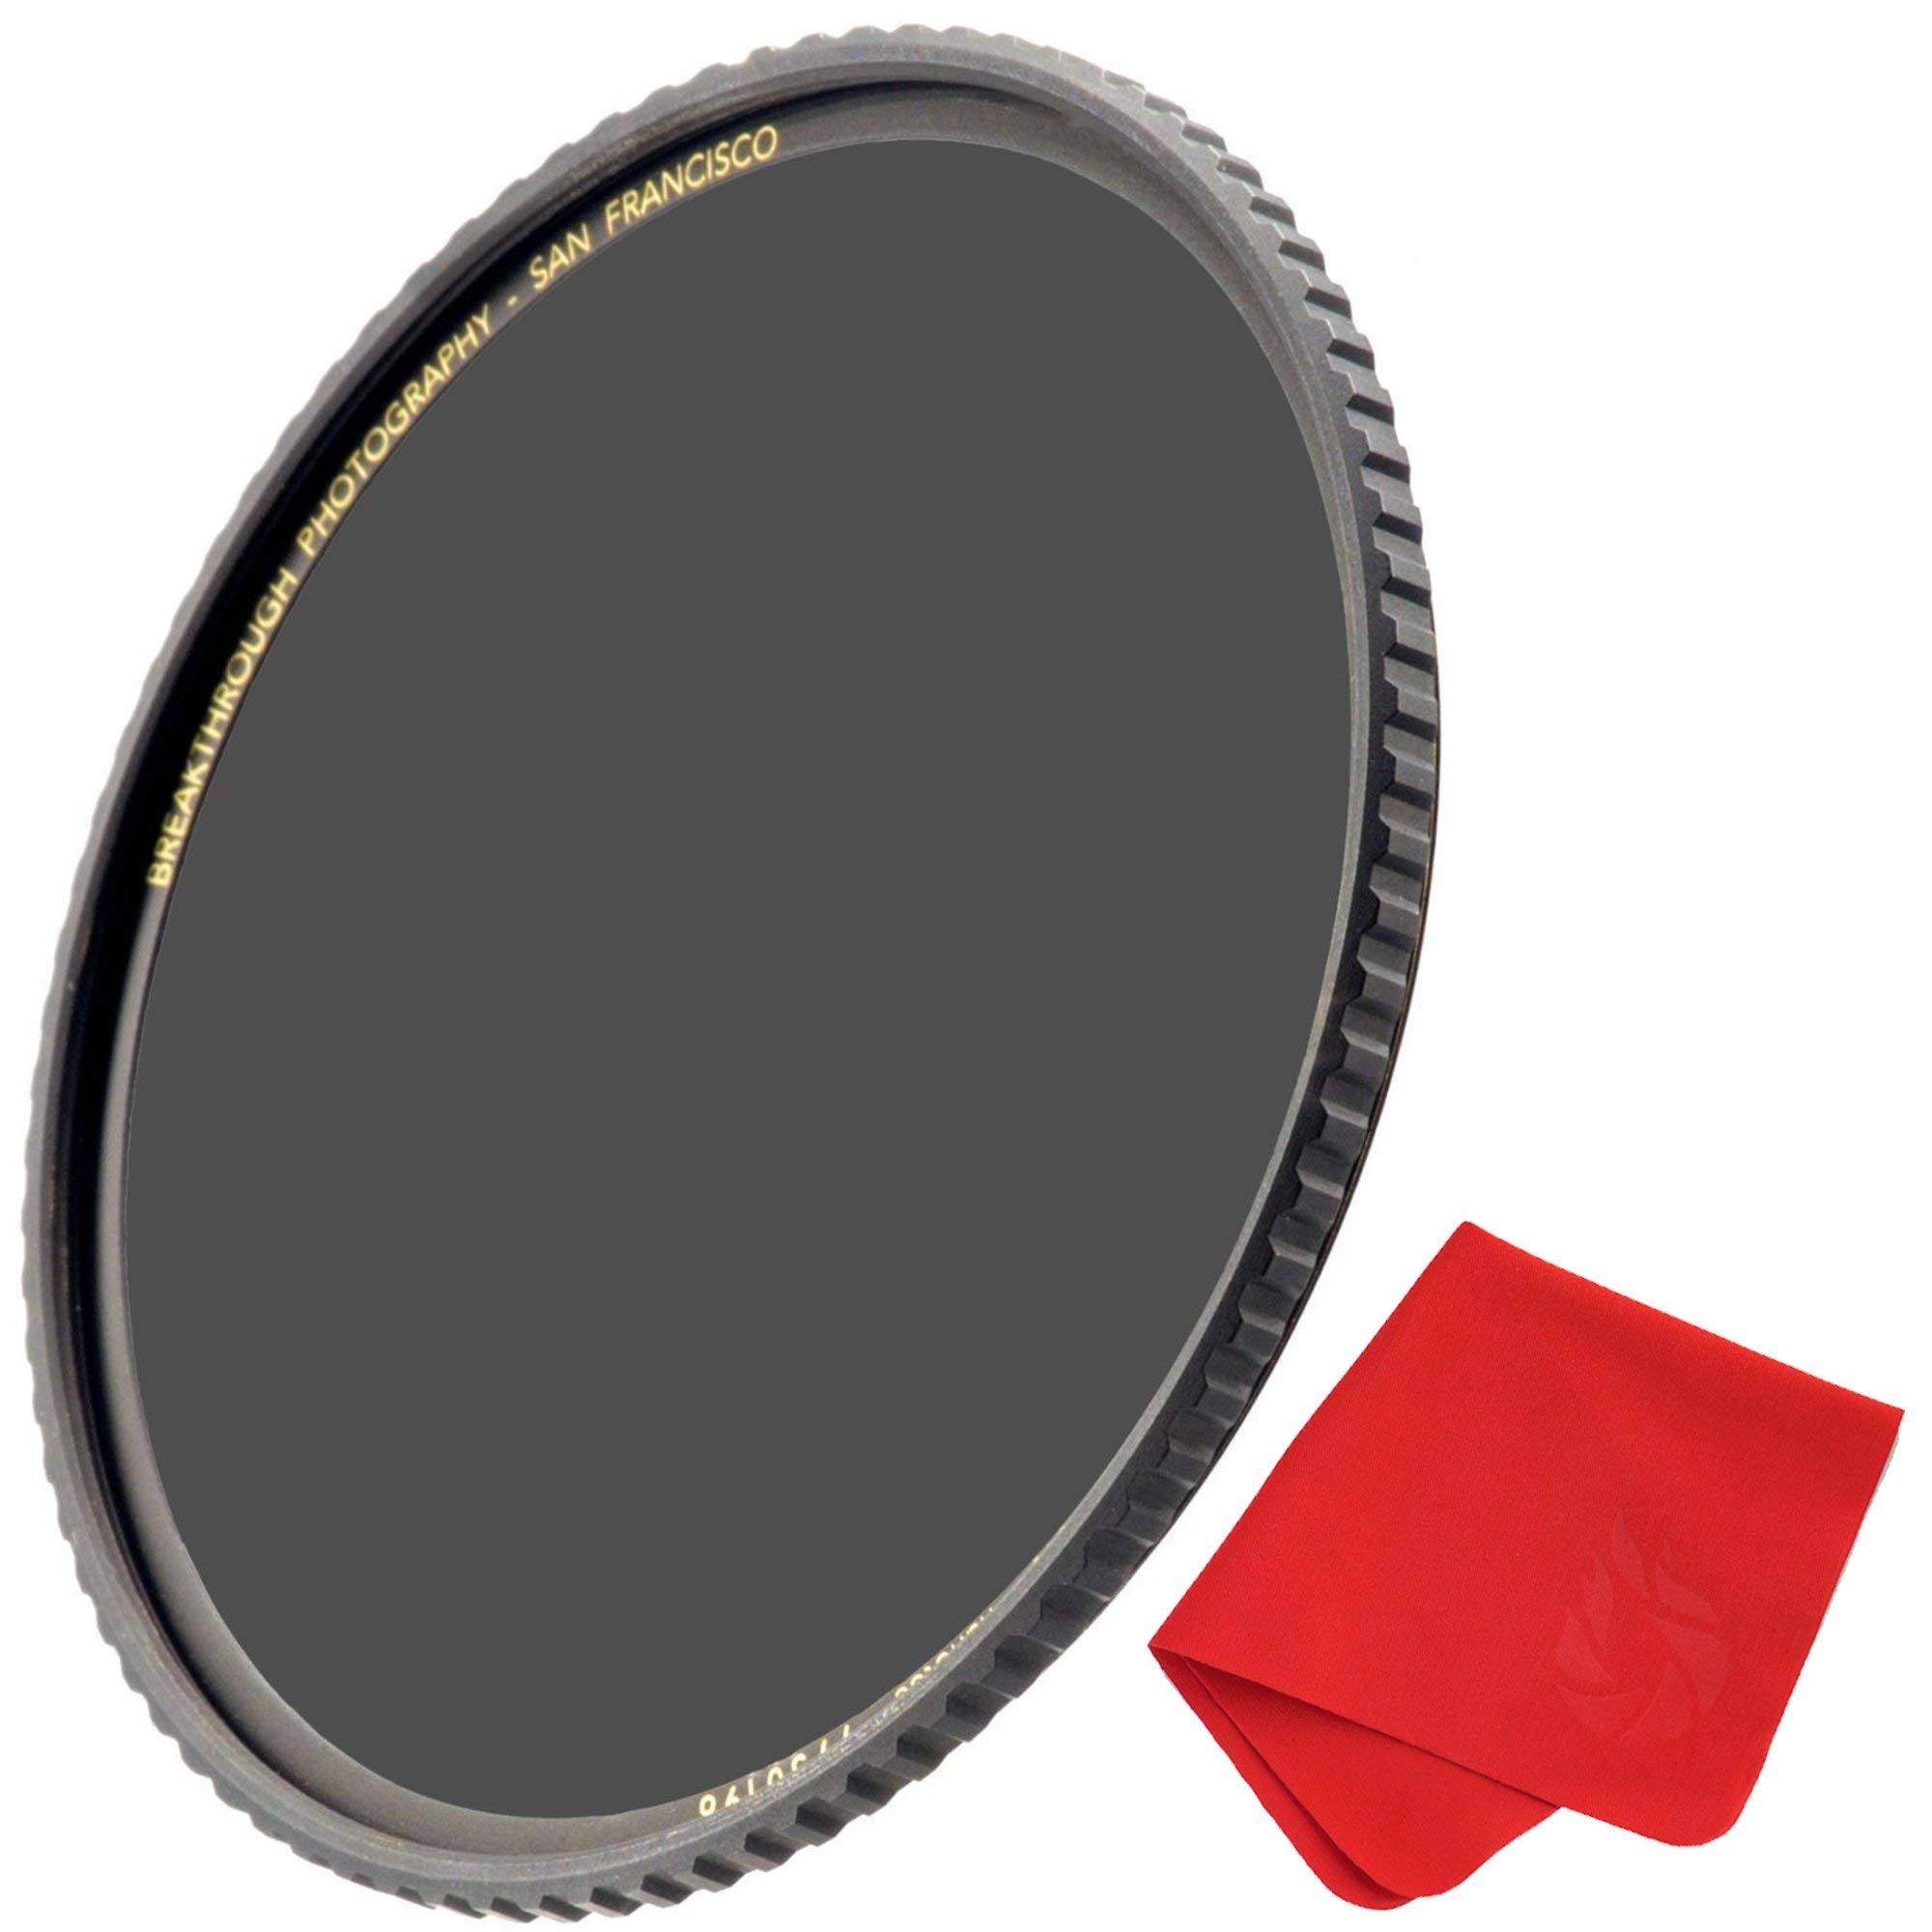 Breakthrough Photography 82mm X4 15-Stop Fixed ND Filter for Camera Lenses Neutral Density Professional Photography Filter, MRC16, Schott B270 Glass, Nanotec, Ultra-Slim, WeatherSealed